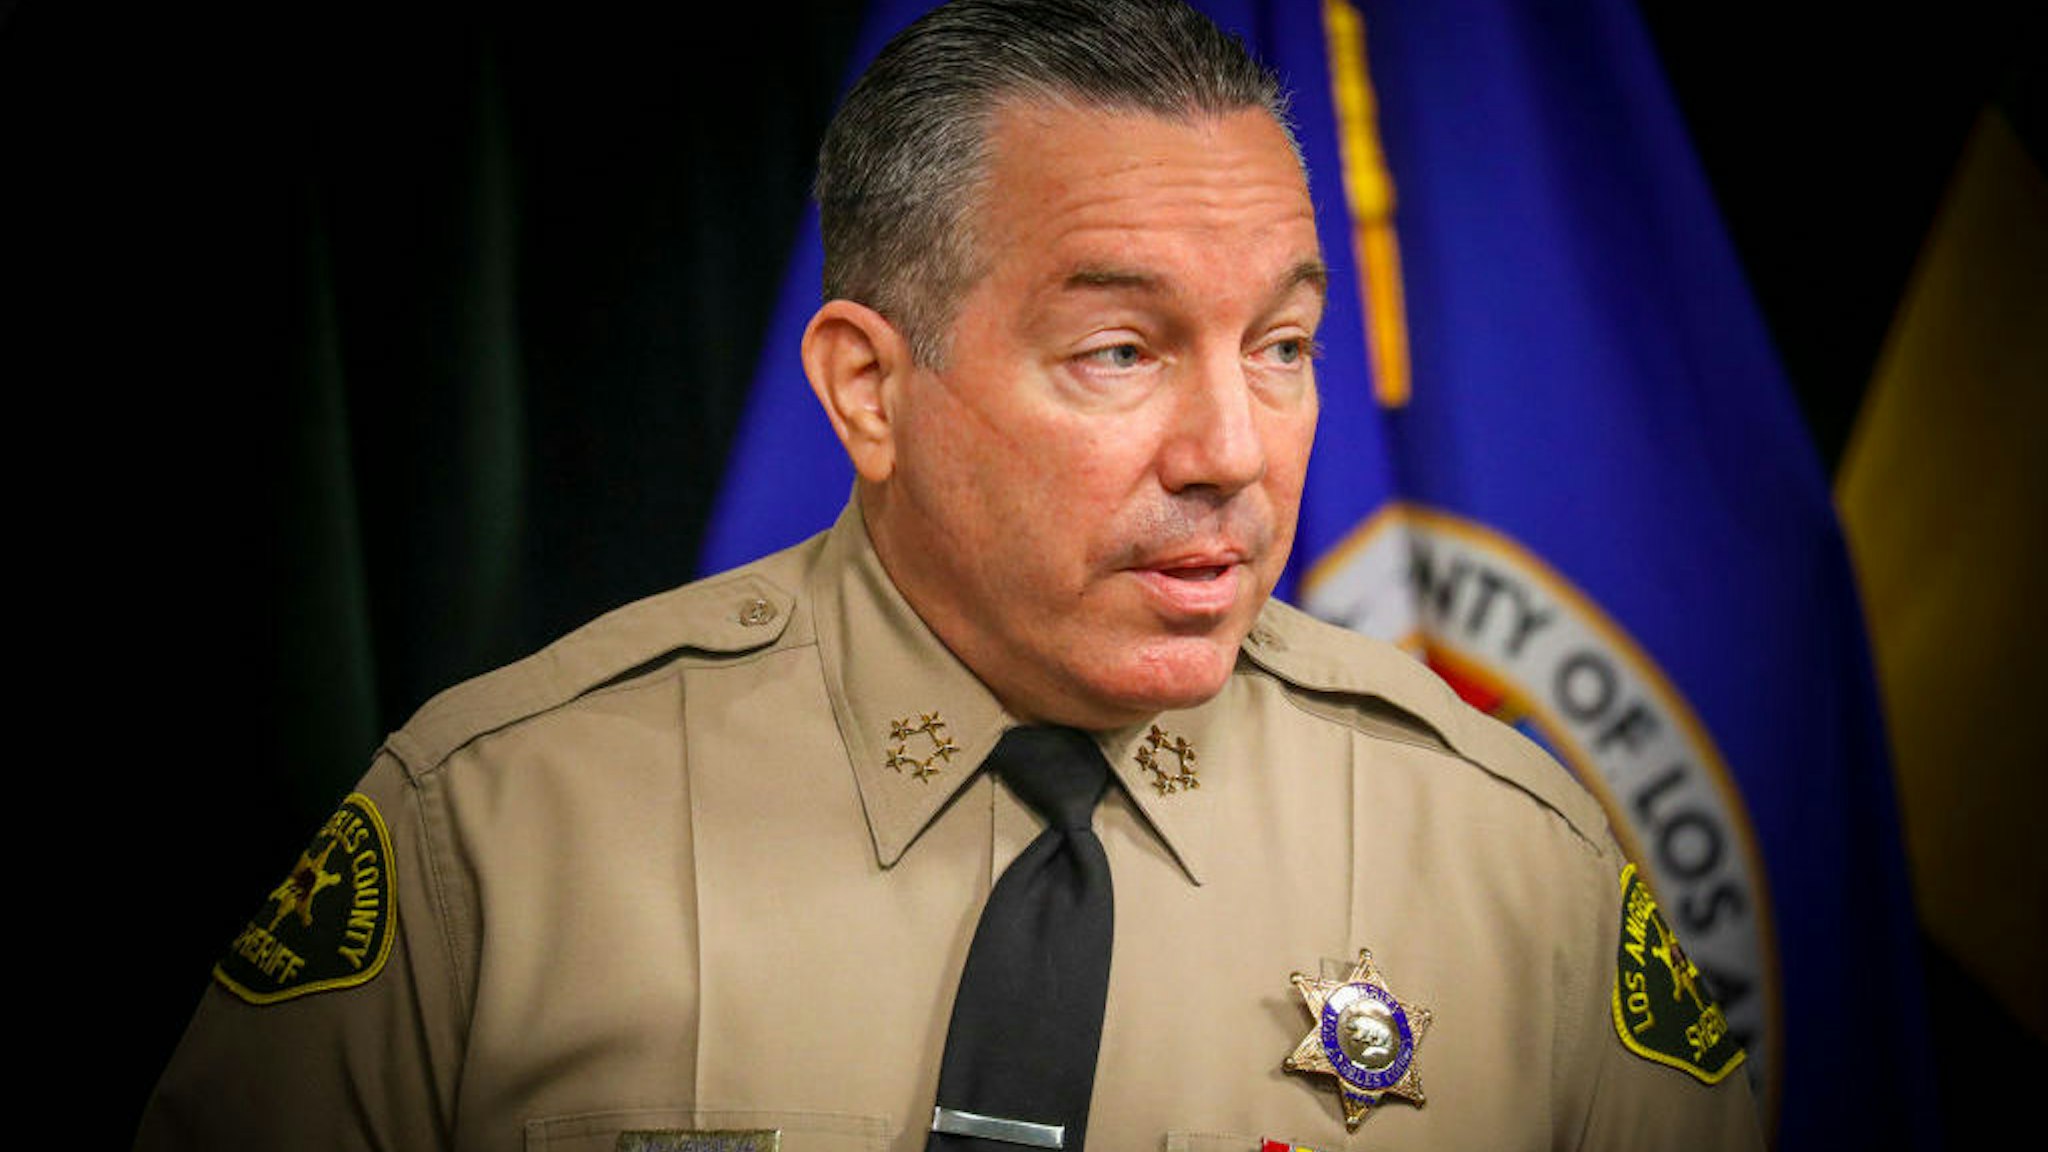 LOS ANGELES, CA - AUGUST 12: Sheriff Alex Villanueva speaks at a news conference to give an update on the fatal shooting by a deputy of Andres Guardado on June 18 near Gardena. in Hall of Justice on Wednesday, Aug. 12, 2020 in Los Angeles, CA. (Irfan Khan / Los Angeles Times)